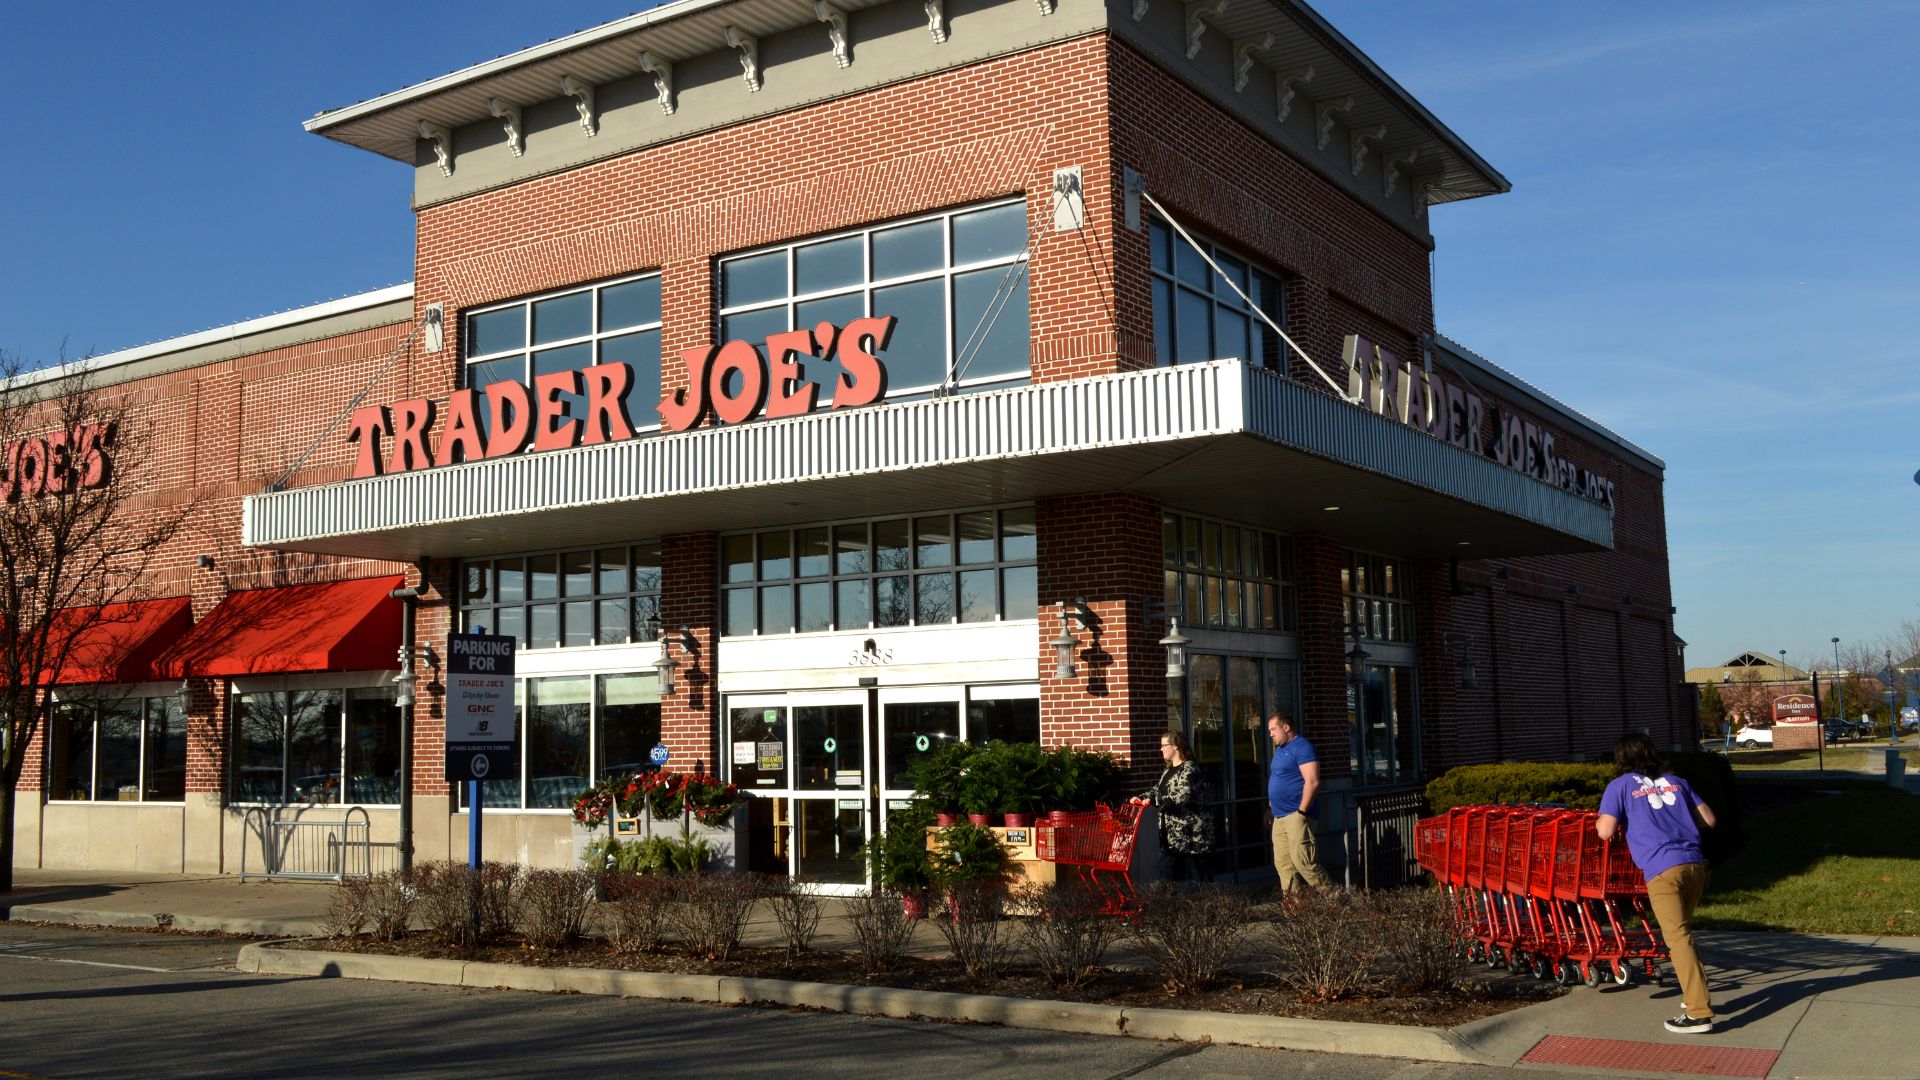 image showing the outside of a trader joe's store - header for does trader joe's deliver post